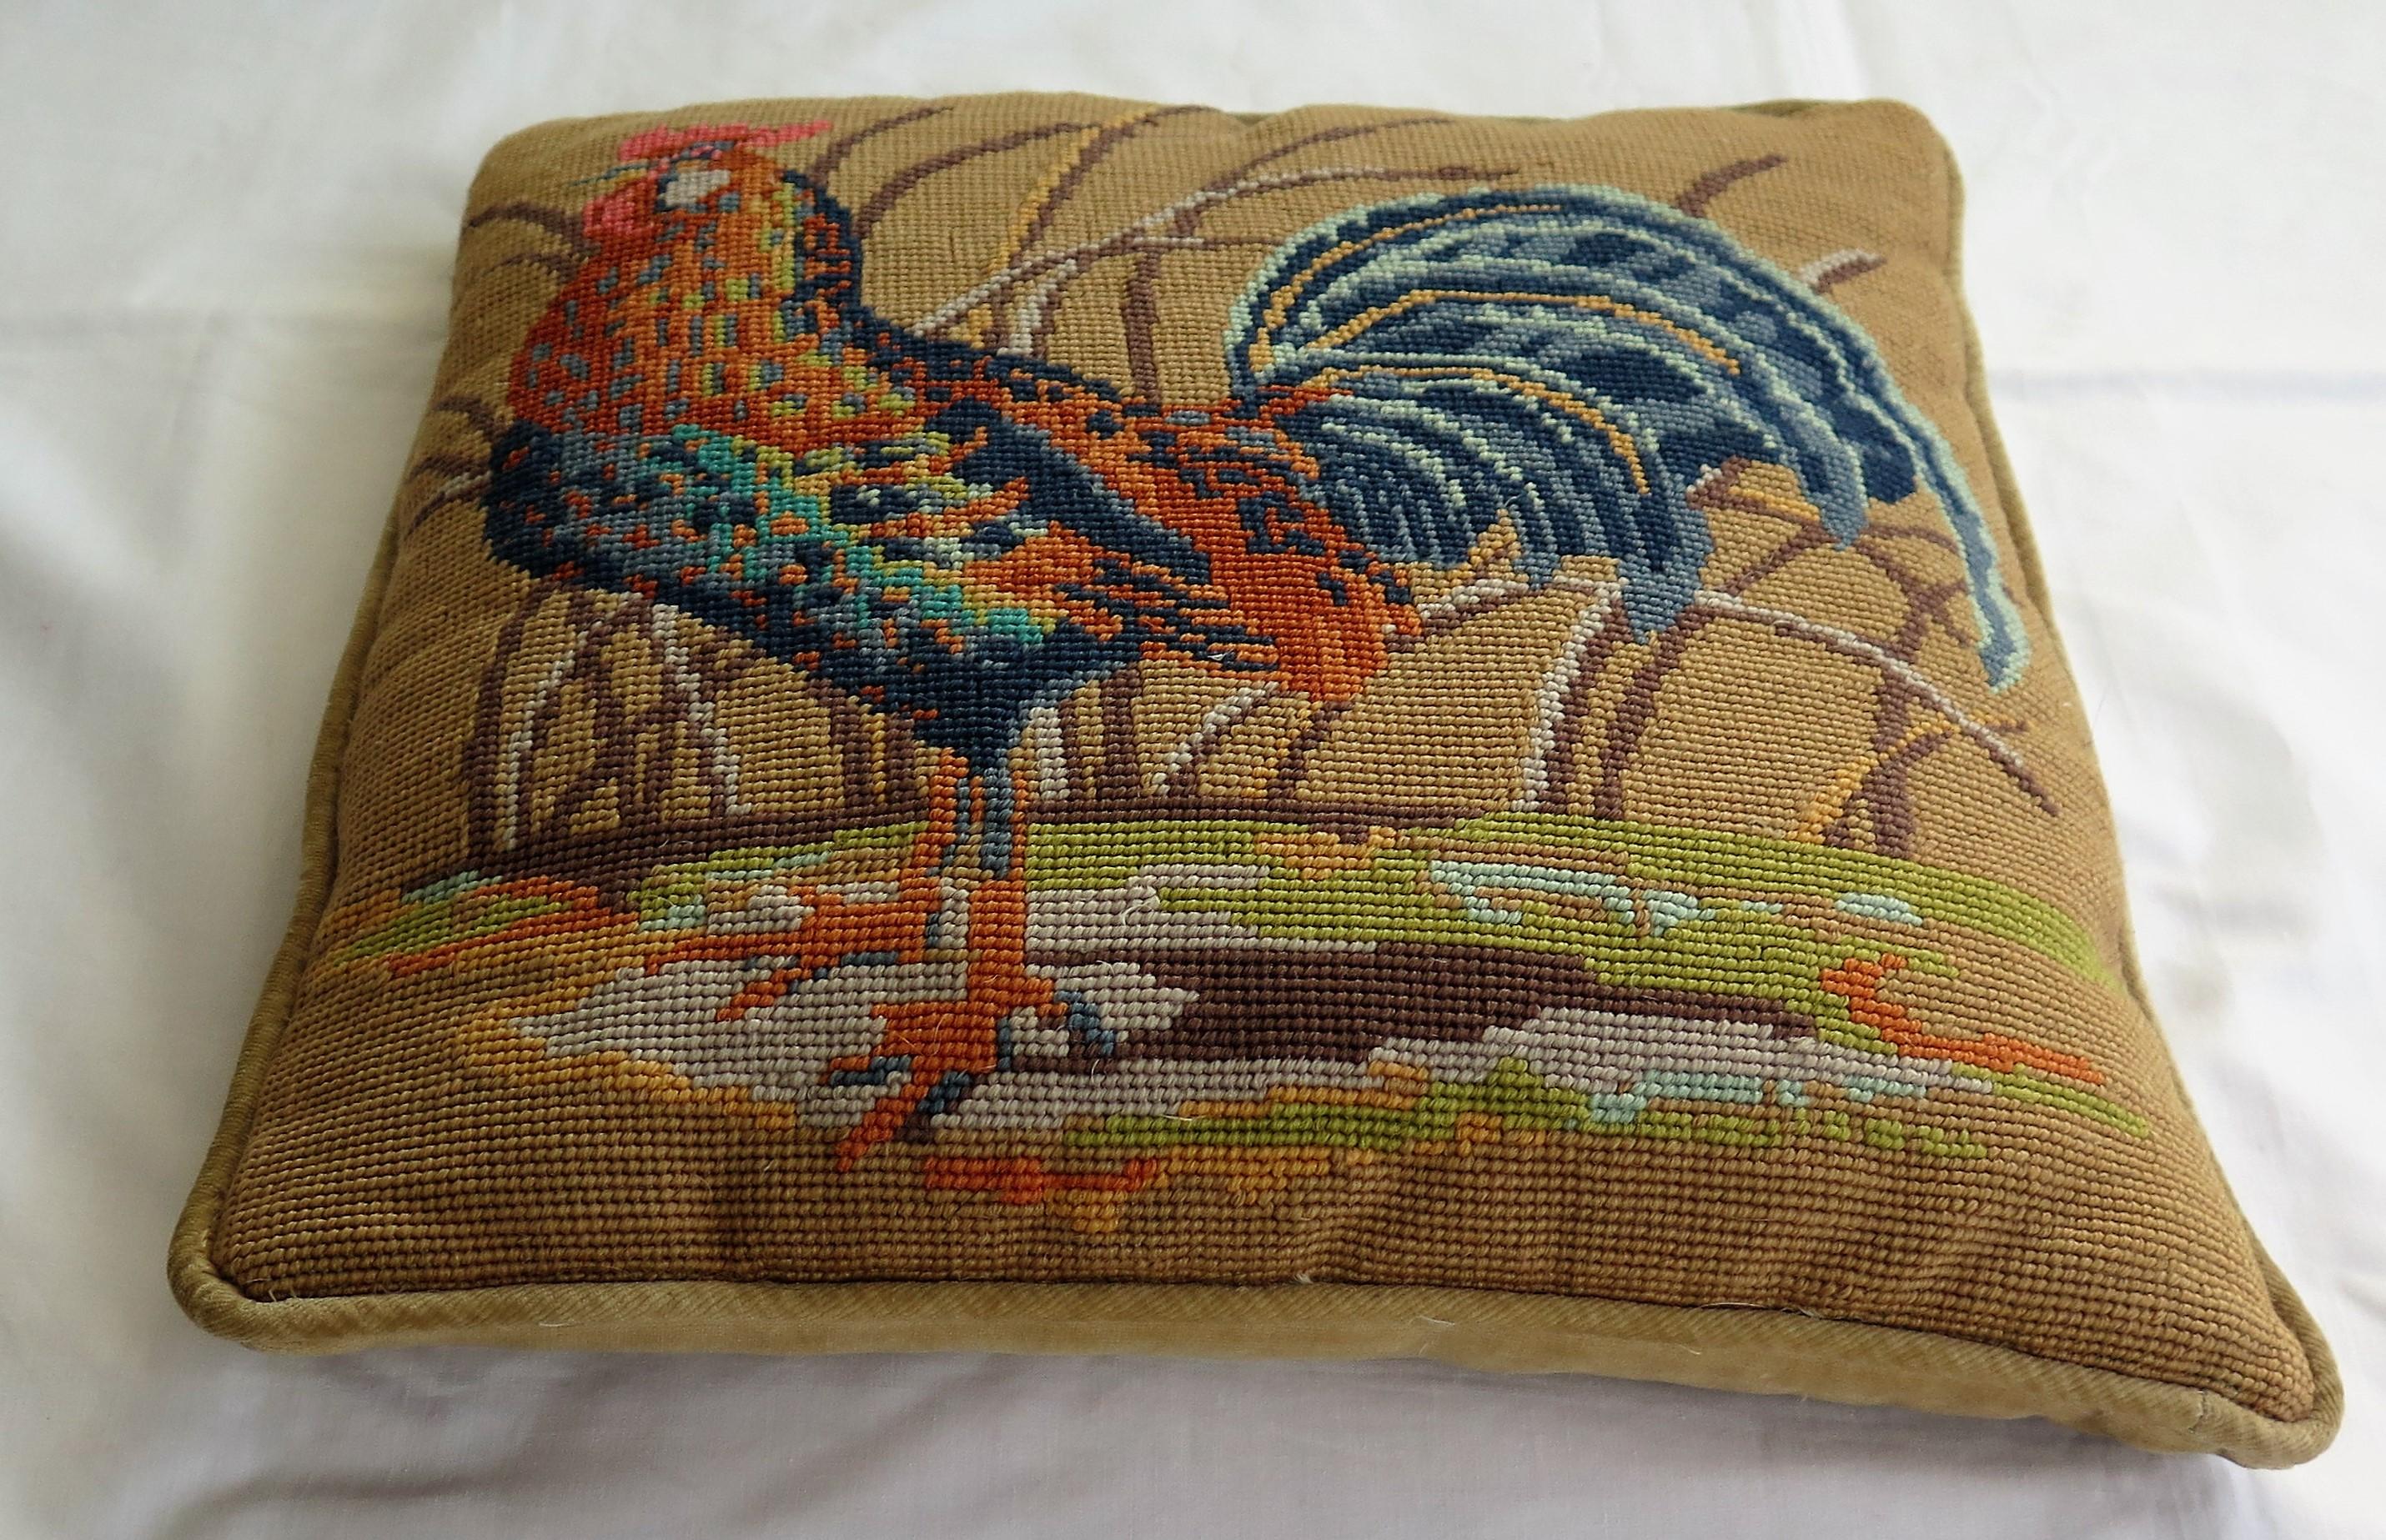 20th Century Needlepoint Tapestry Cushion or Pillow of Rooster or Cockerel, circa 1940